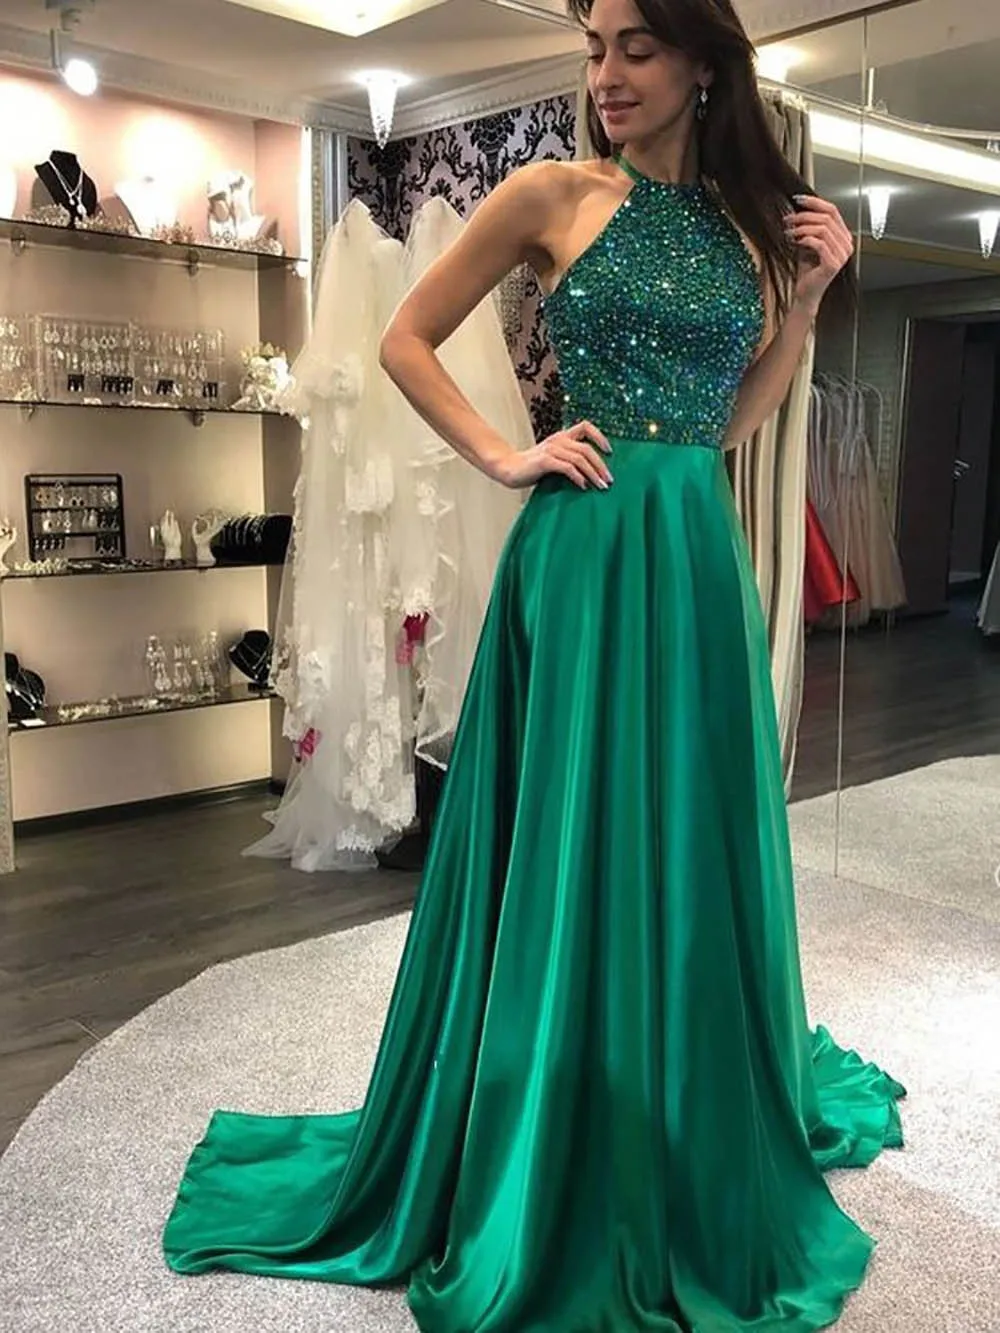 

O-Neck Green Prom Dresses A-Line Halter Satin Beaded Backless Party Maxys Long Prom Gown Graduation Evening Dresses Robe De Soir